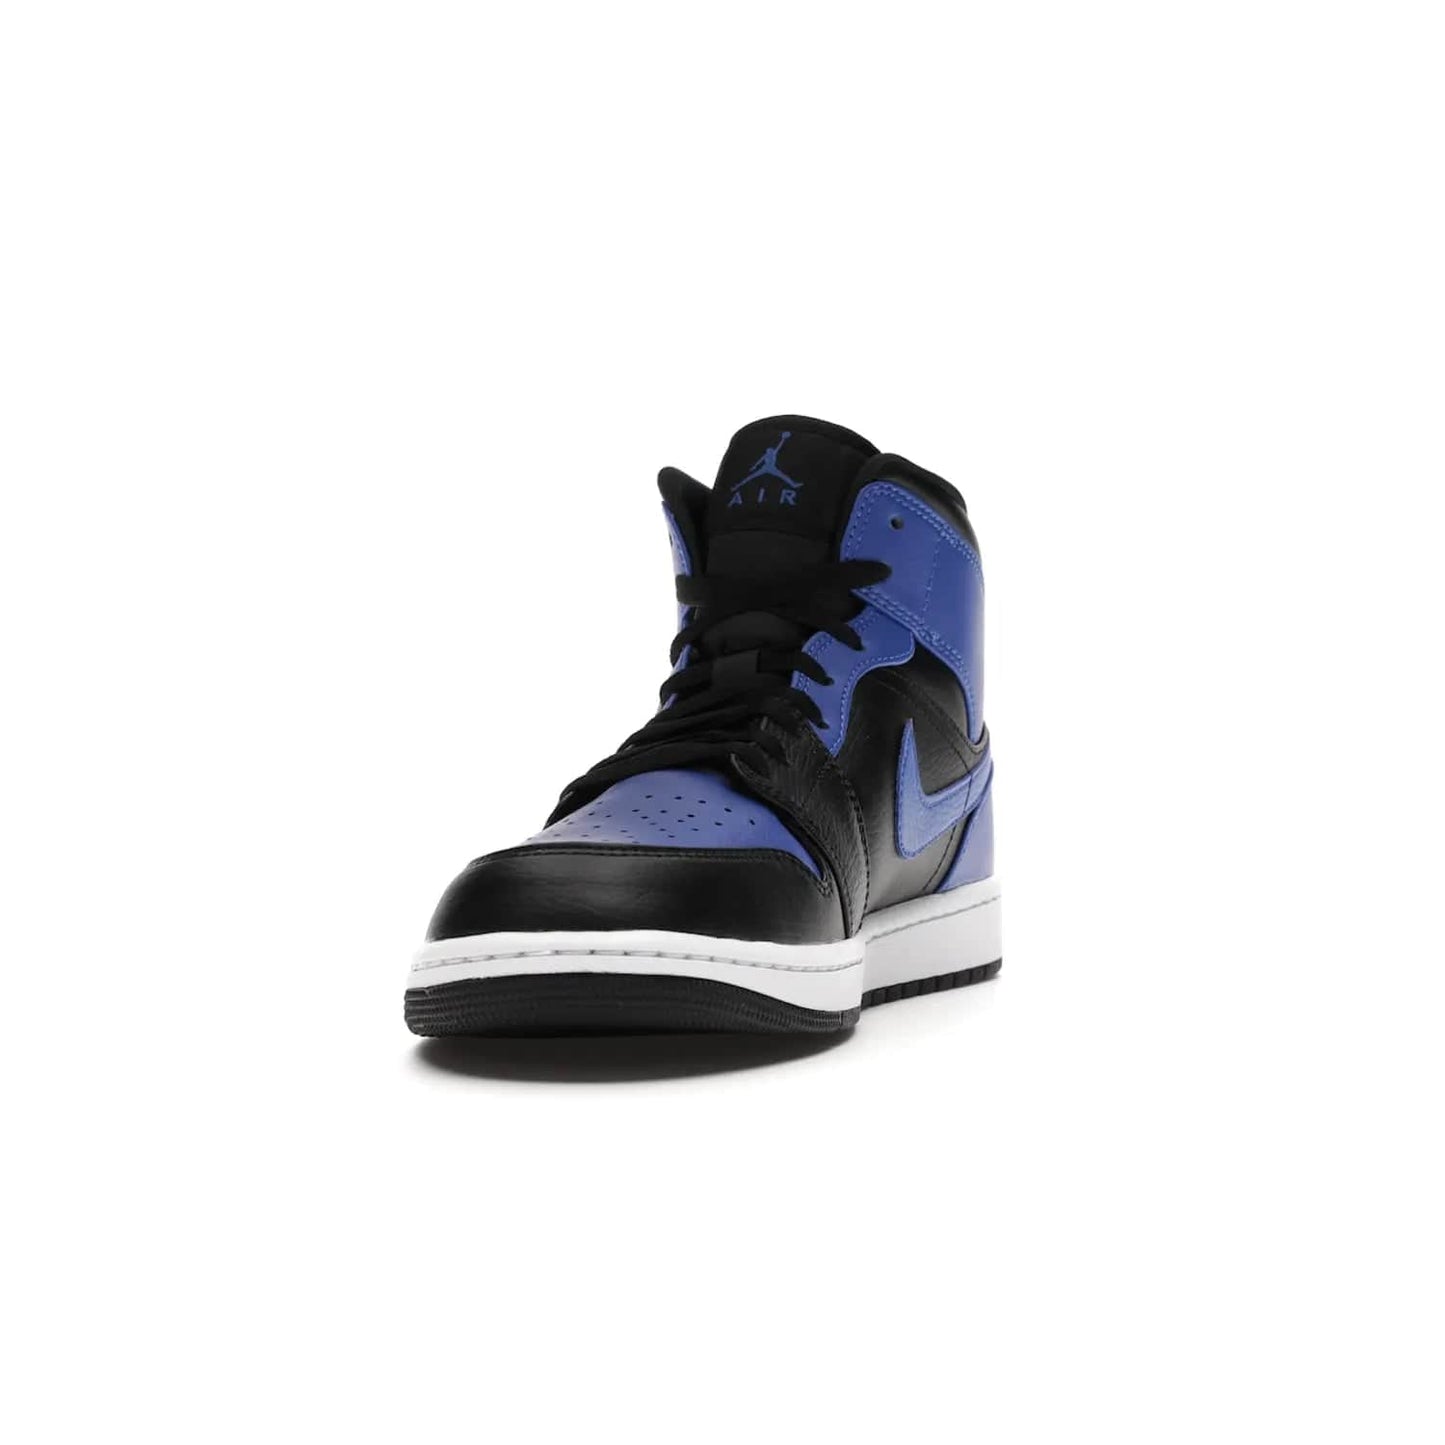 Jordan 1 Mid Hyper Royal Tumbled Leather - Image 12 - Only at www.BallersClubKickz.com - Iconic colorway of the Air Jordan 1 Mid Black Royal Tumbled Leather. Features a black tumbled leather upper, royal blue leather overlays, white midsole & black rubber outsole. Released December 2020. Adds premium style to any collection.